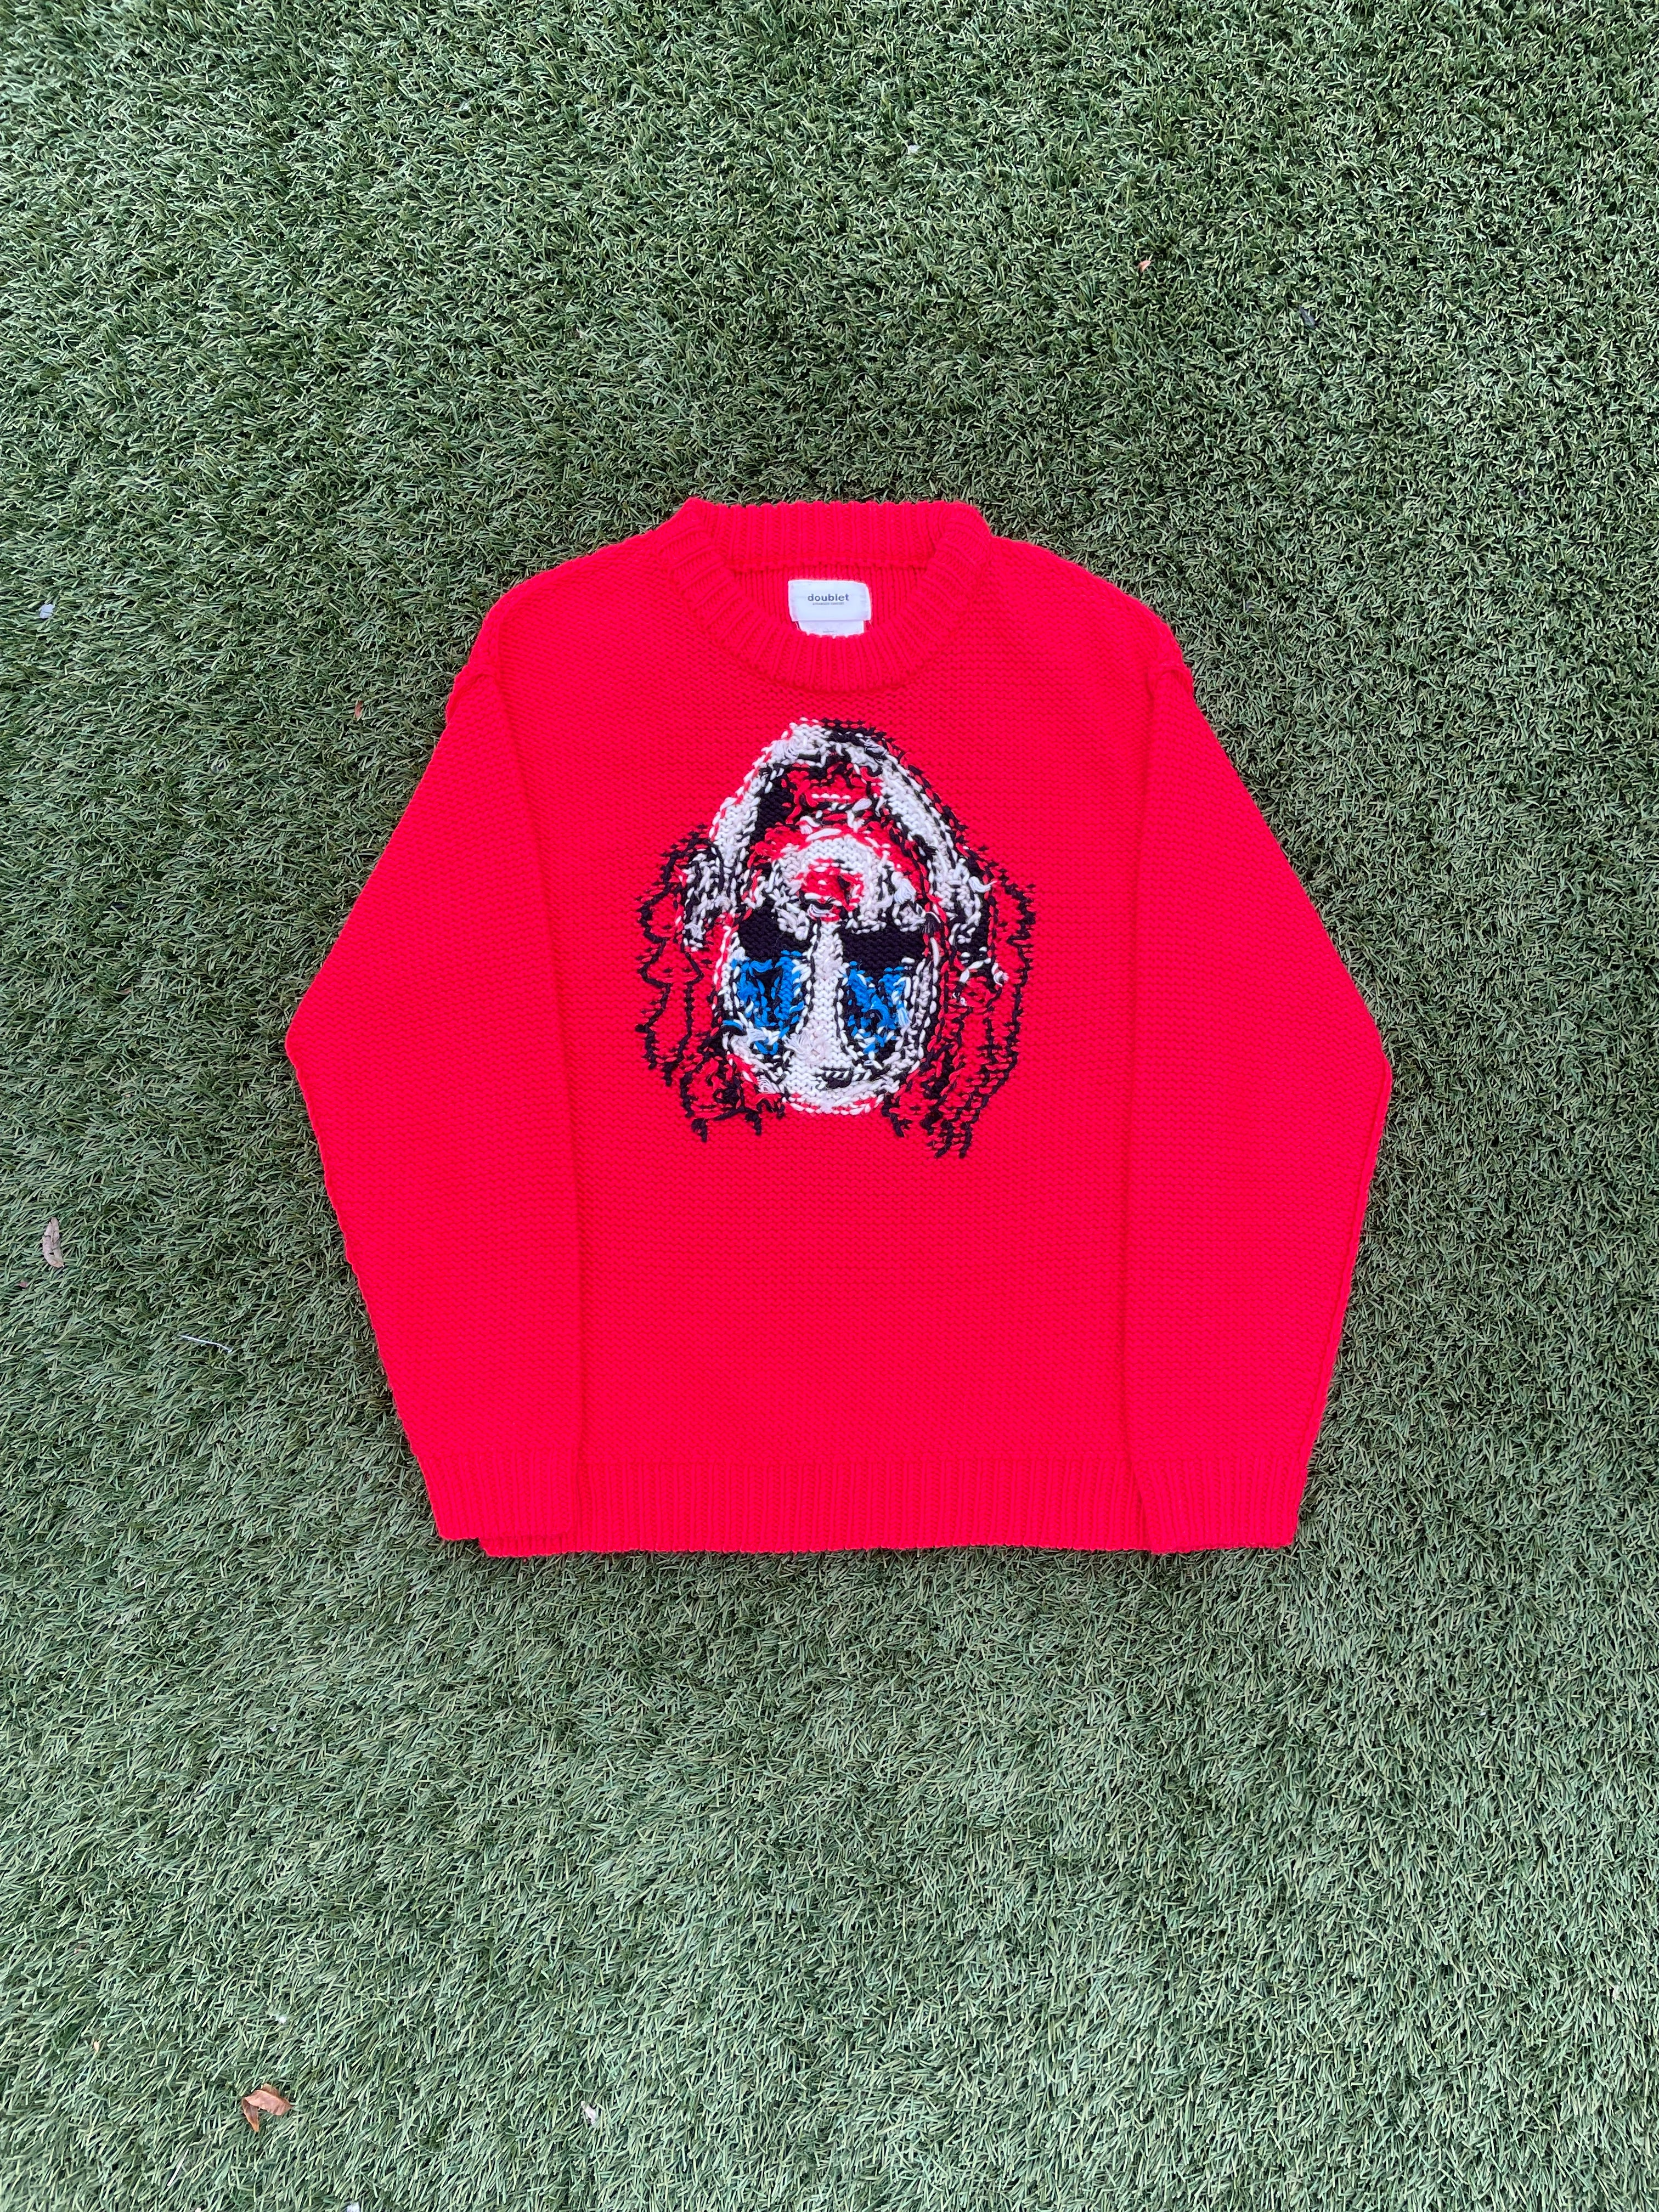 FW20 Doublet Inside Out Clown Hand-Knit Sweater 🤡 – rwndbckwrds